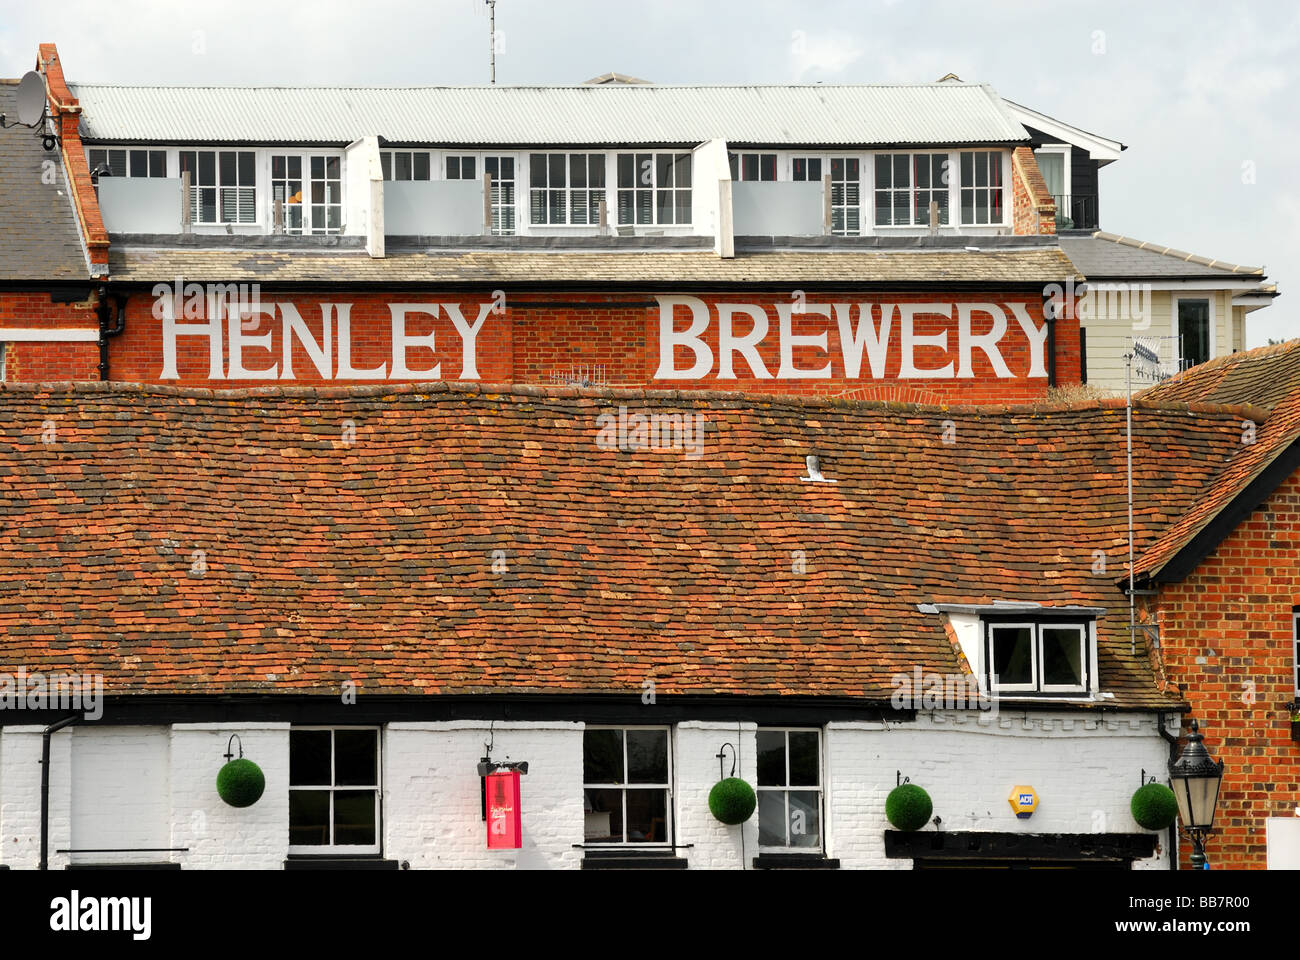 Henley brewery building Stock Photo